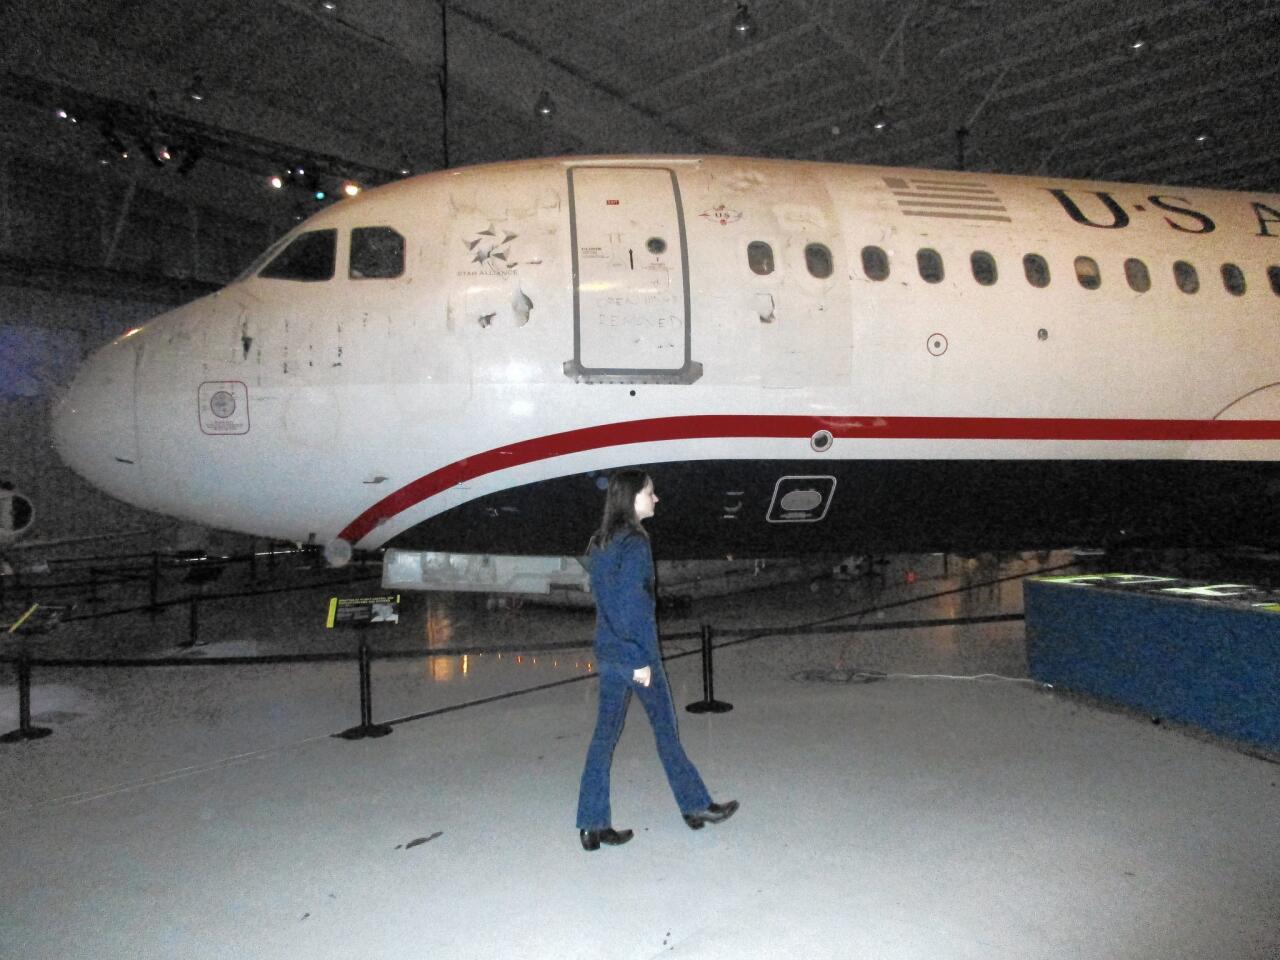 The roped-off Airbus A320 sits low to the ground so that the jet's tall tail can fit inside the museum's dimly lit hangar.